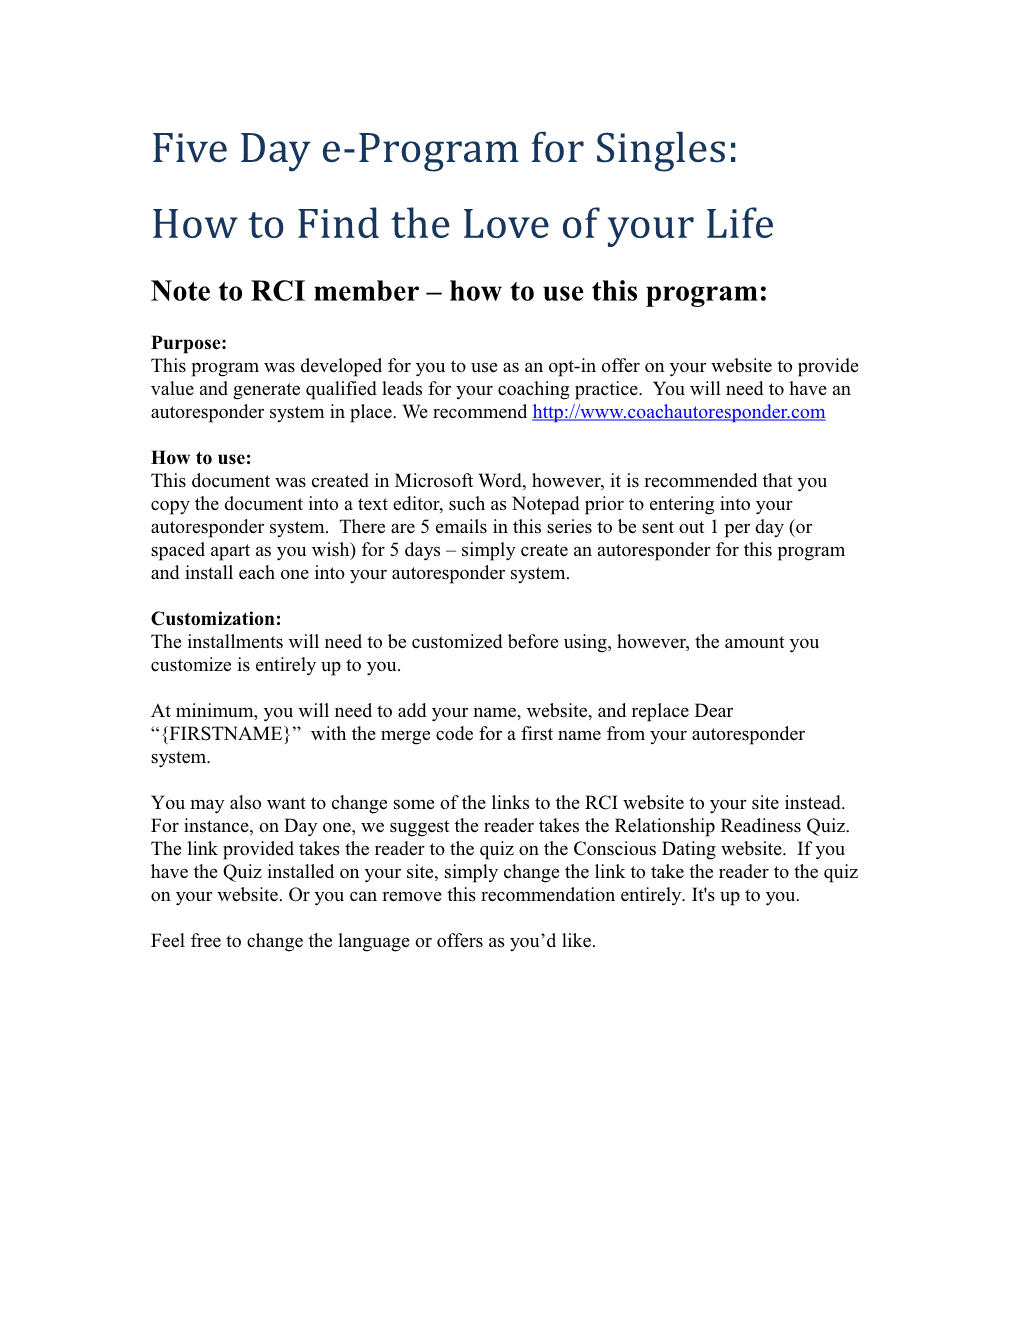 Five Day E-Program for Singles- HOW to FIND YOUR LIFE PARTNER